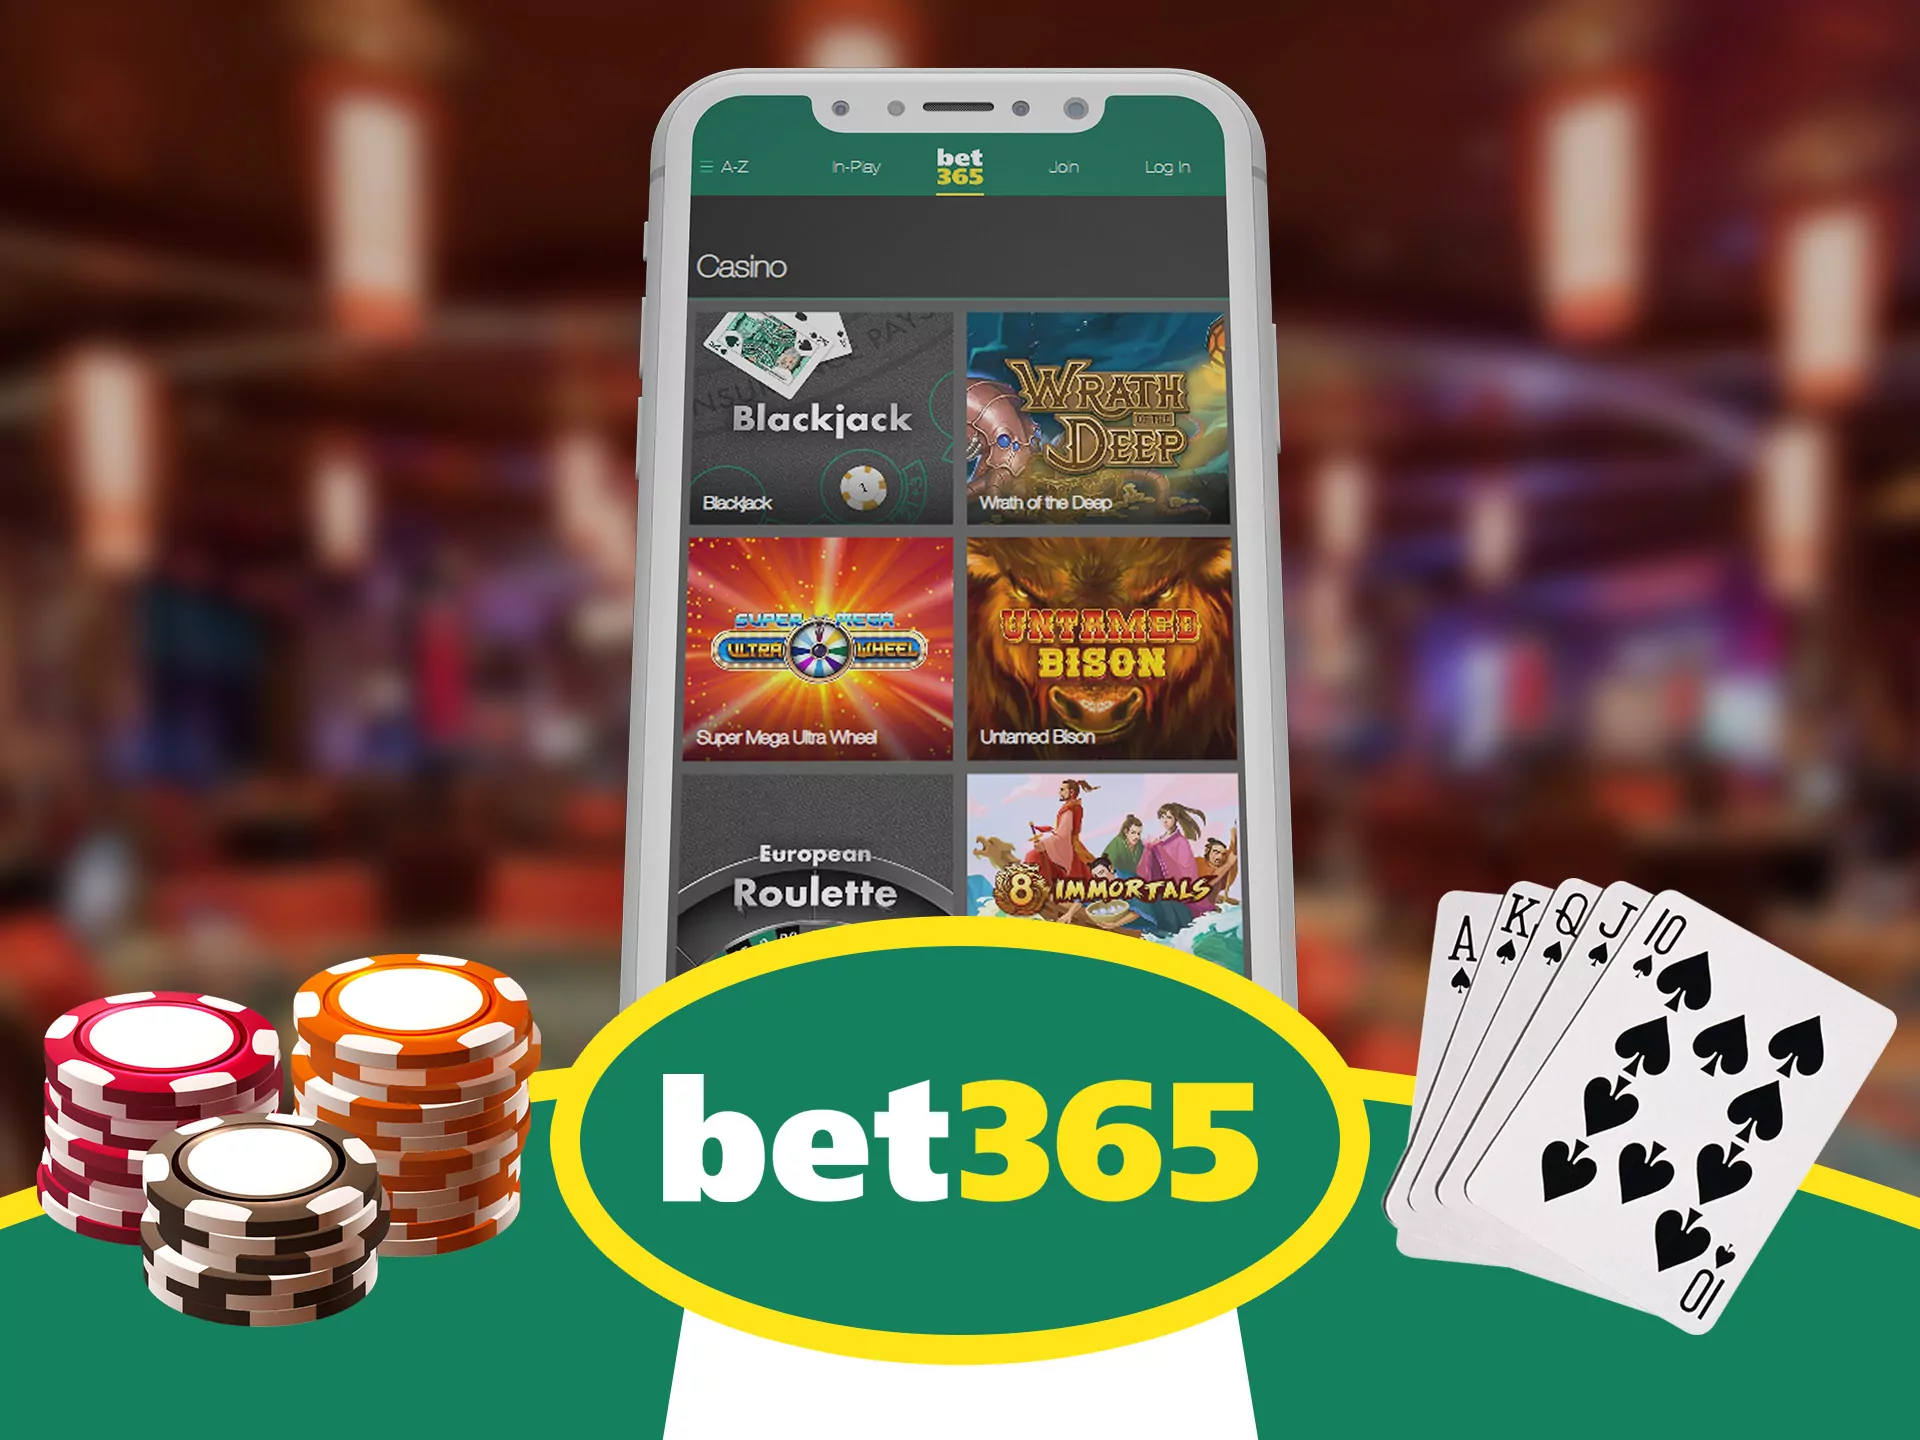 Check for our casino games in Bet365 app.